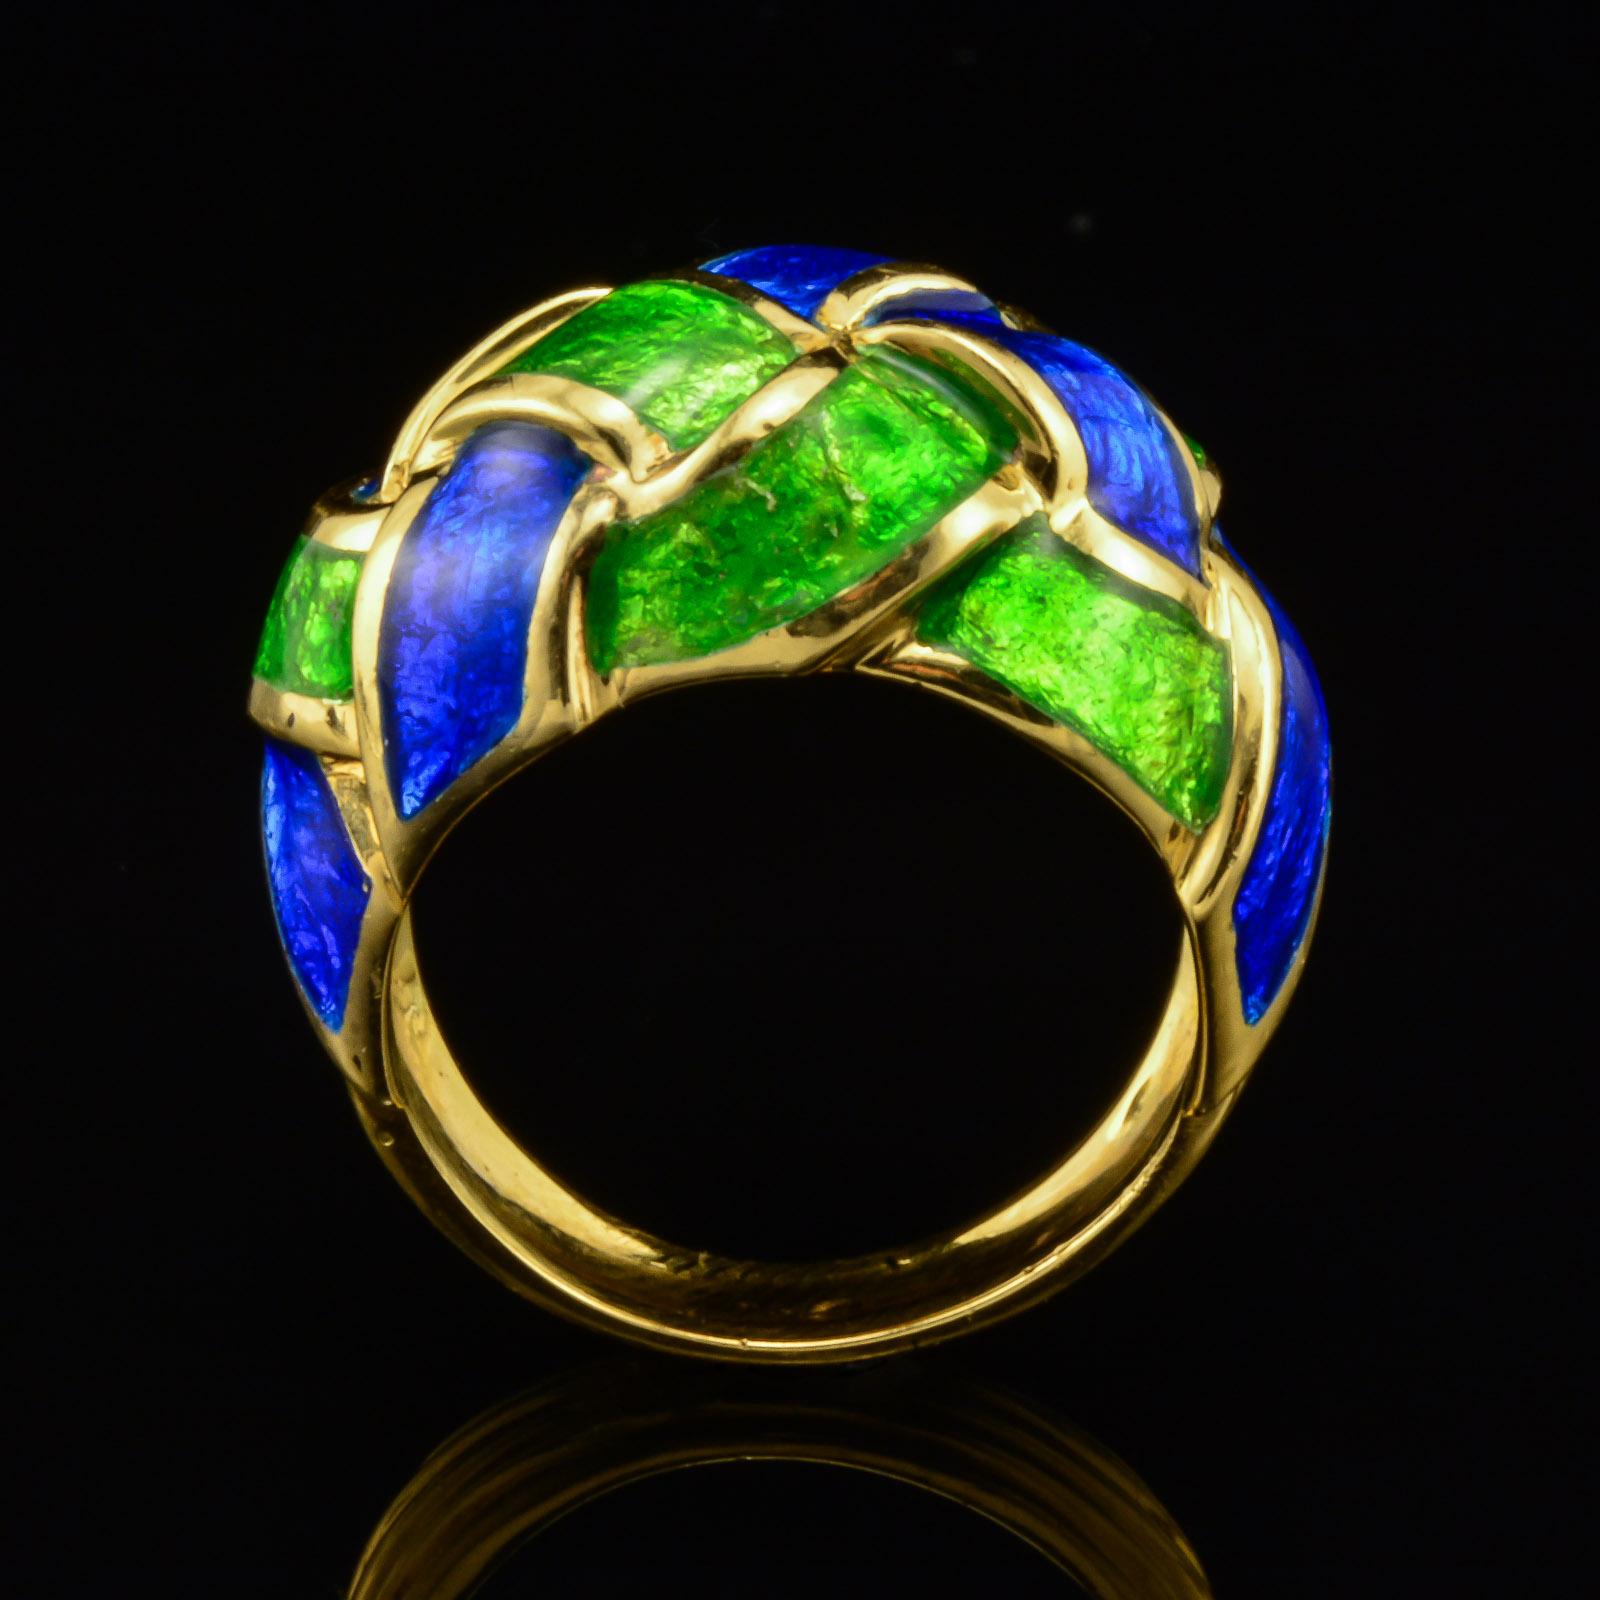 This is an authentic retro singed Tiffany & Co. French designer Schlumberger Enamel dome ring circa 1960's. The ring is expertly fashioned in solid high polish 18 karat yellow Gold bearing full hallmarks. The transparent vivid royal Blue and glowing